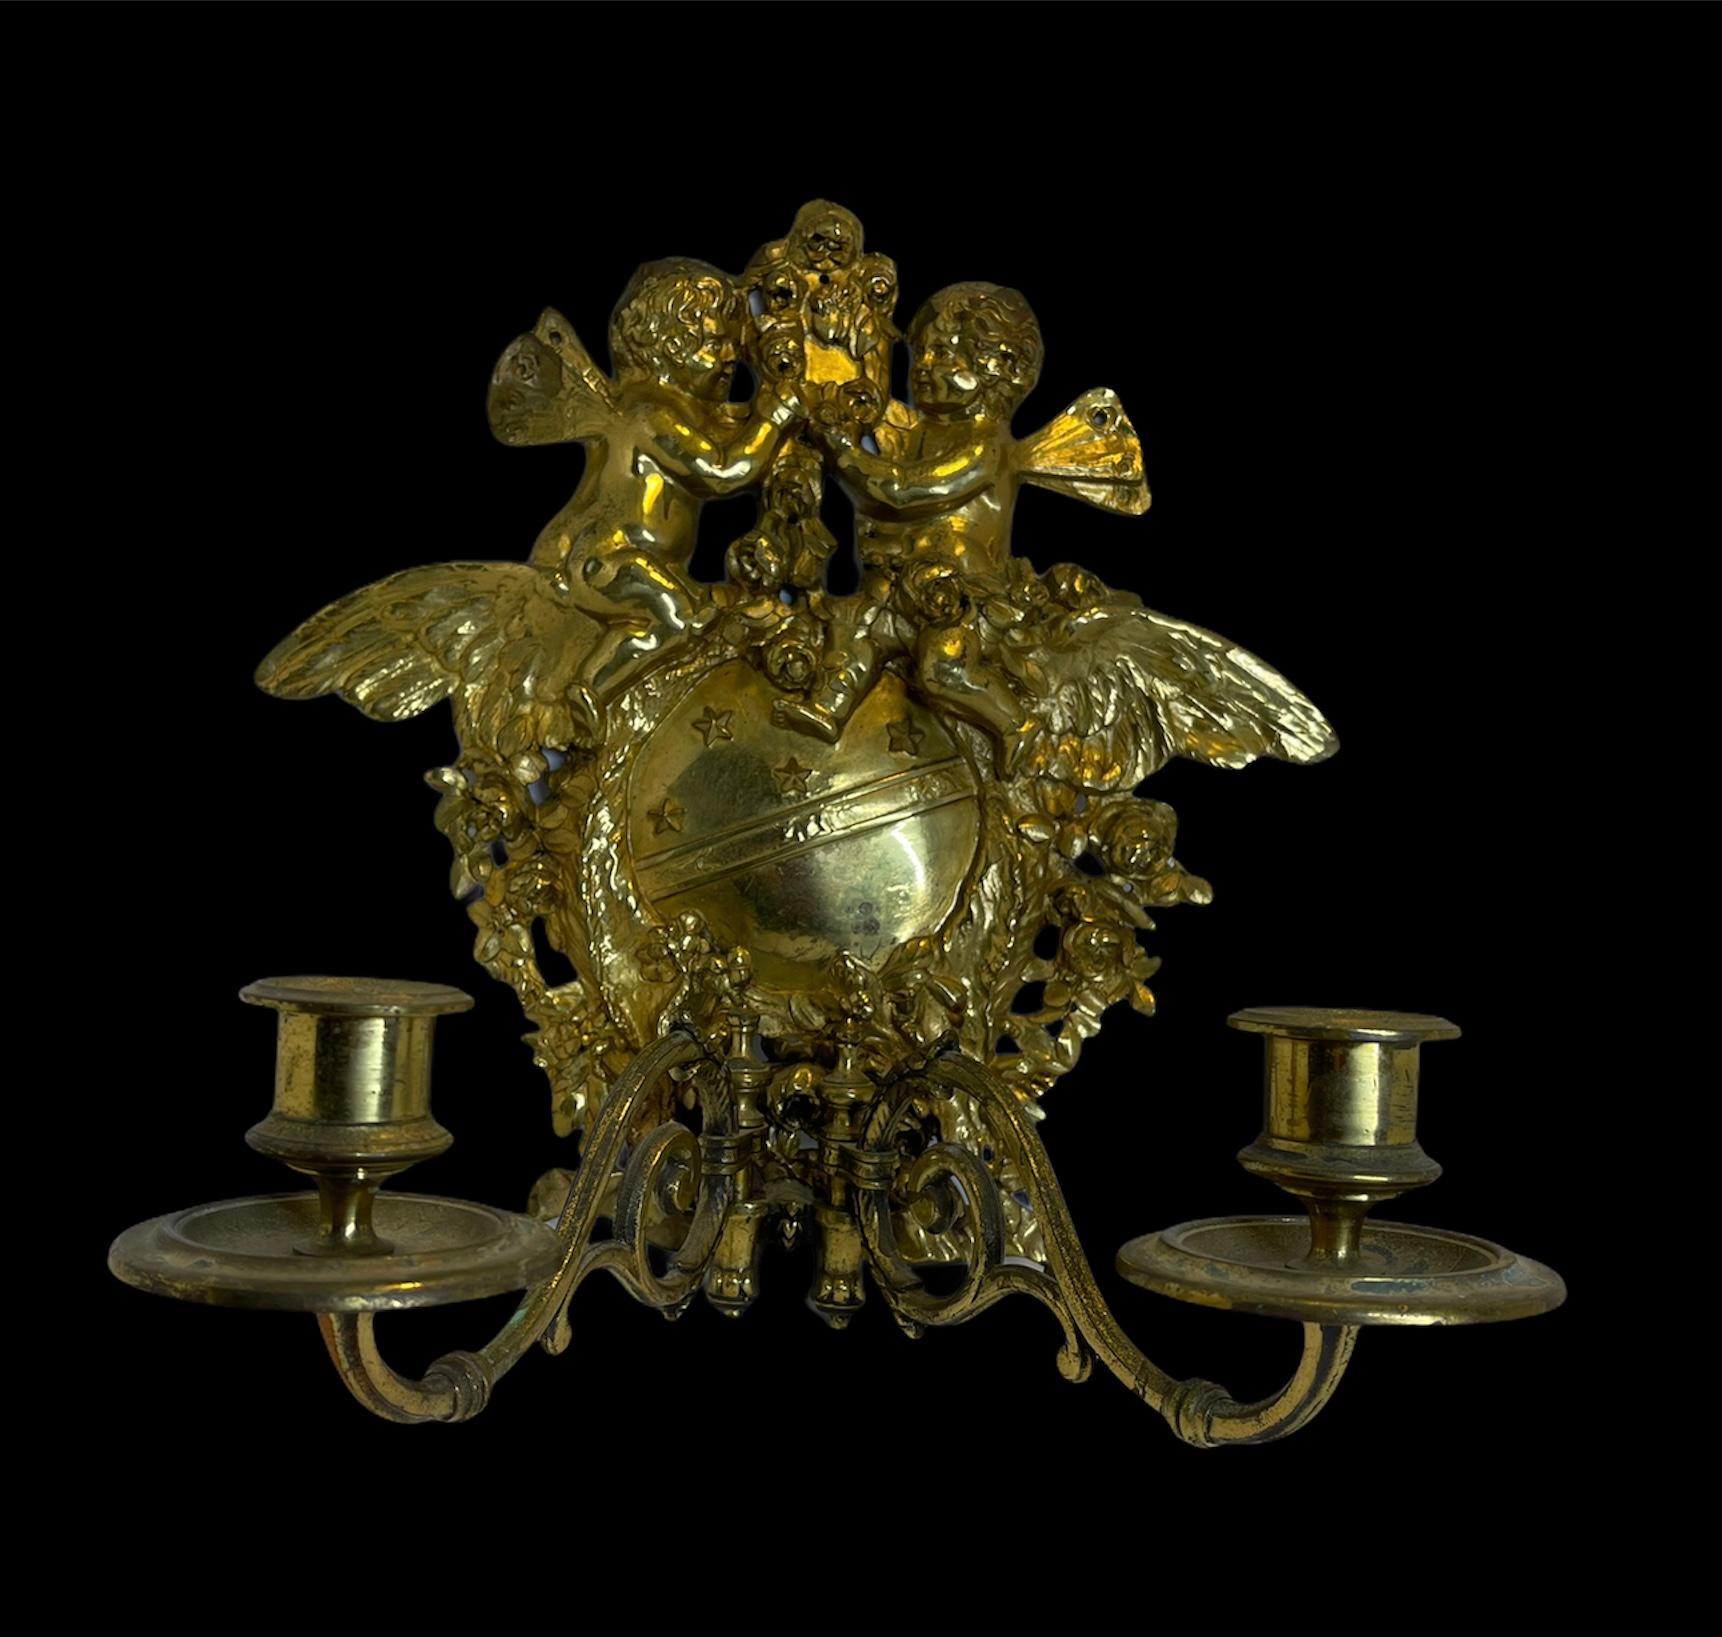 20th Century Bronze Cherub Wall Sconce or Wall Candleholder For Sale